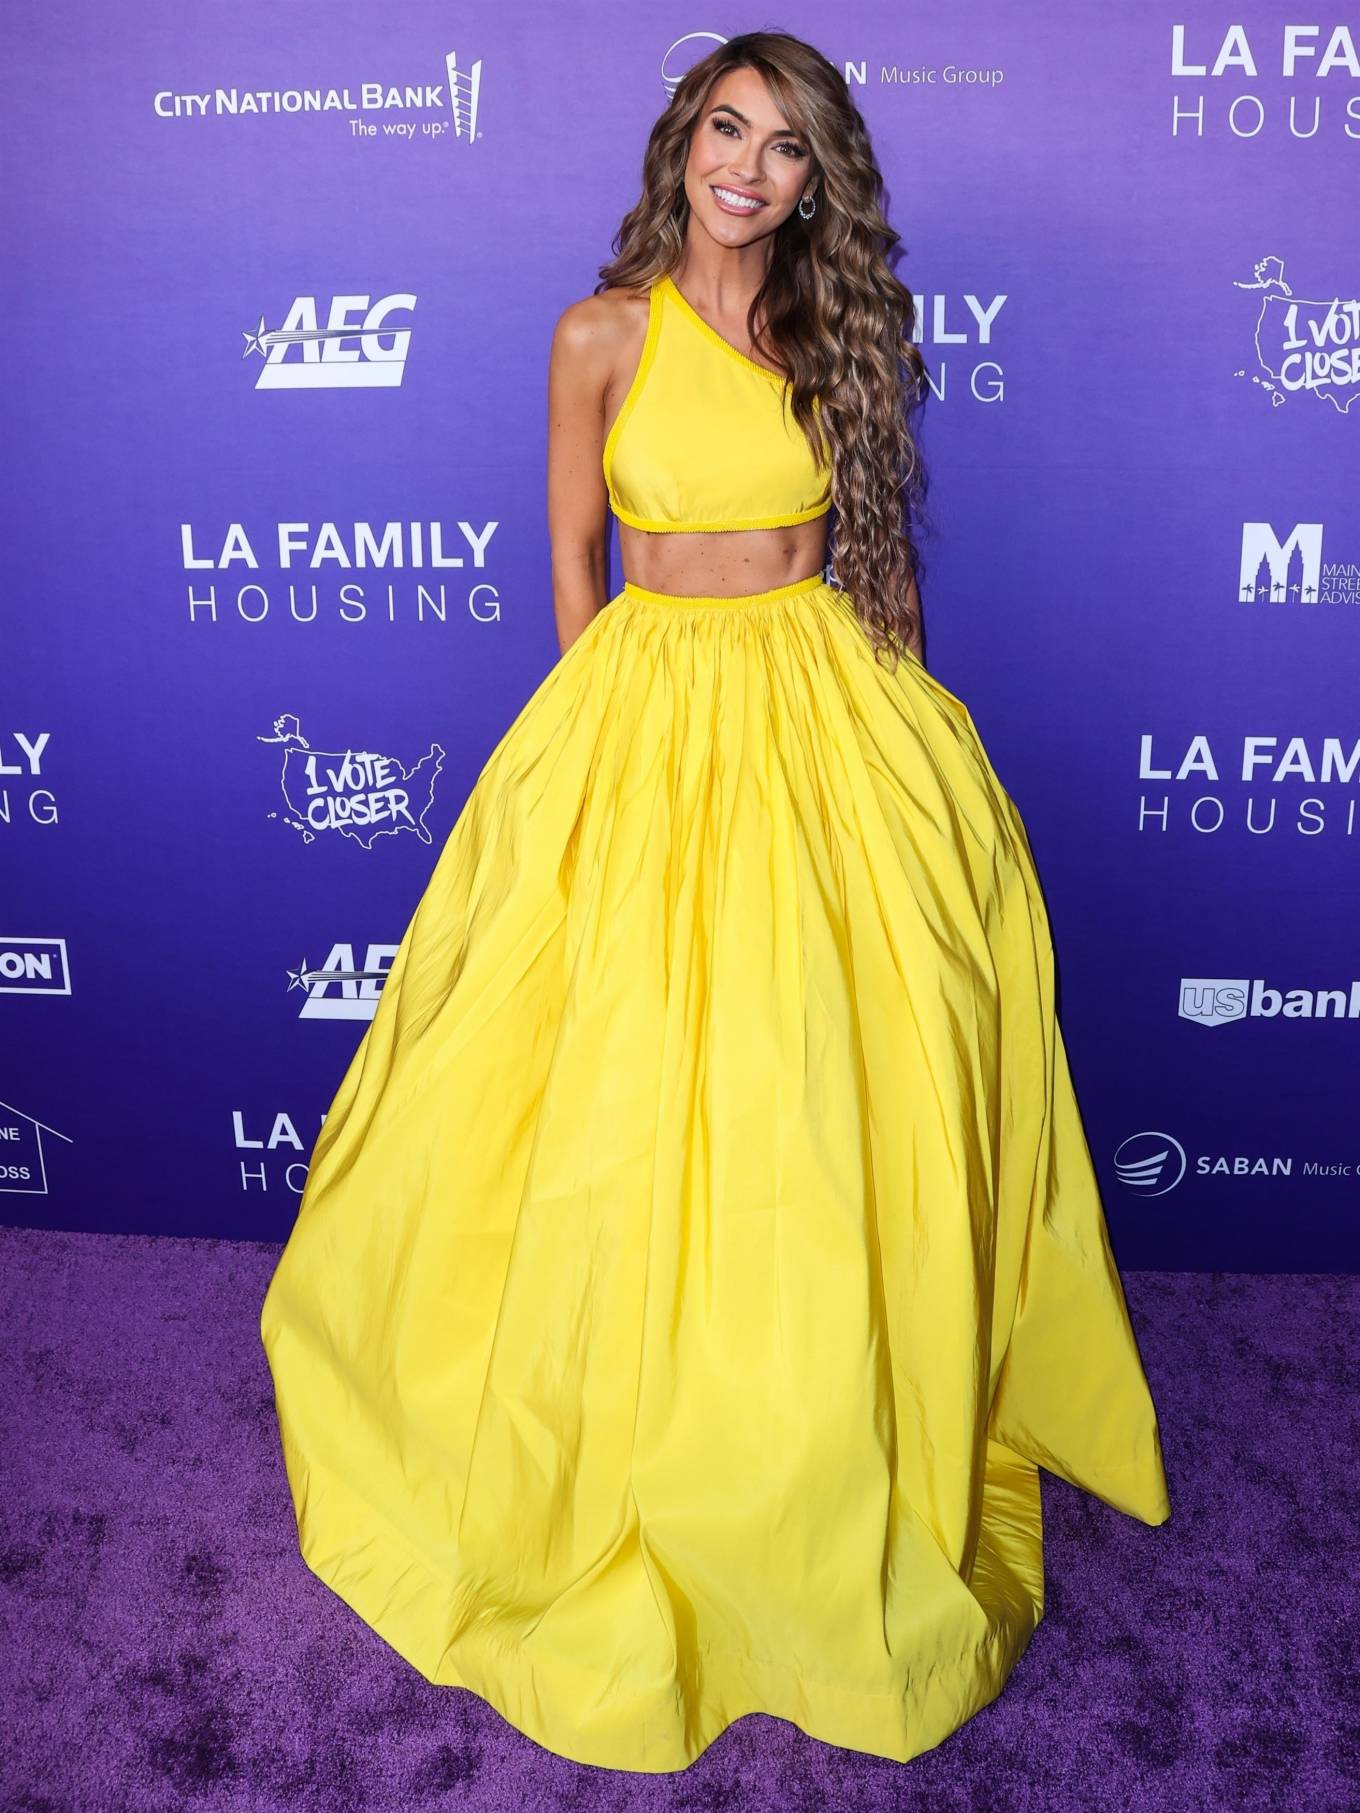 Chrishell Stause - LA Family Housing (LAFH) Awards 2022 held at the Pacific Design Center